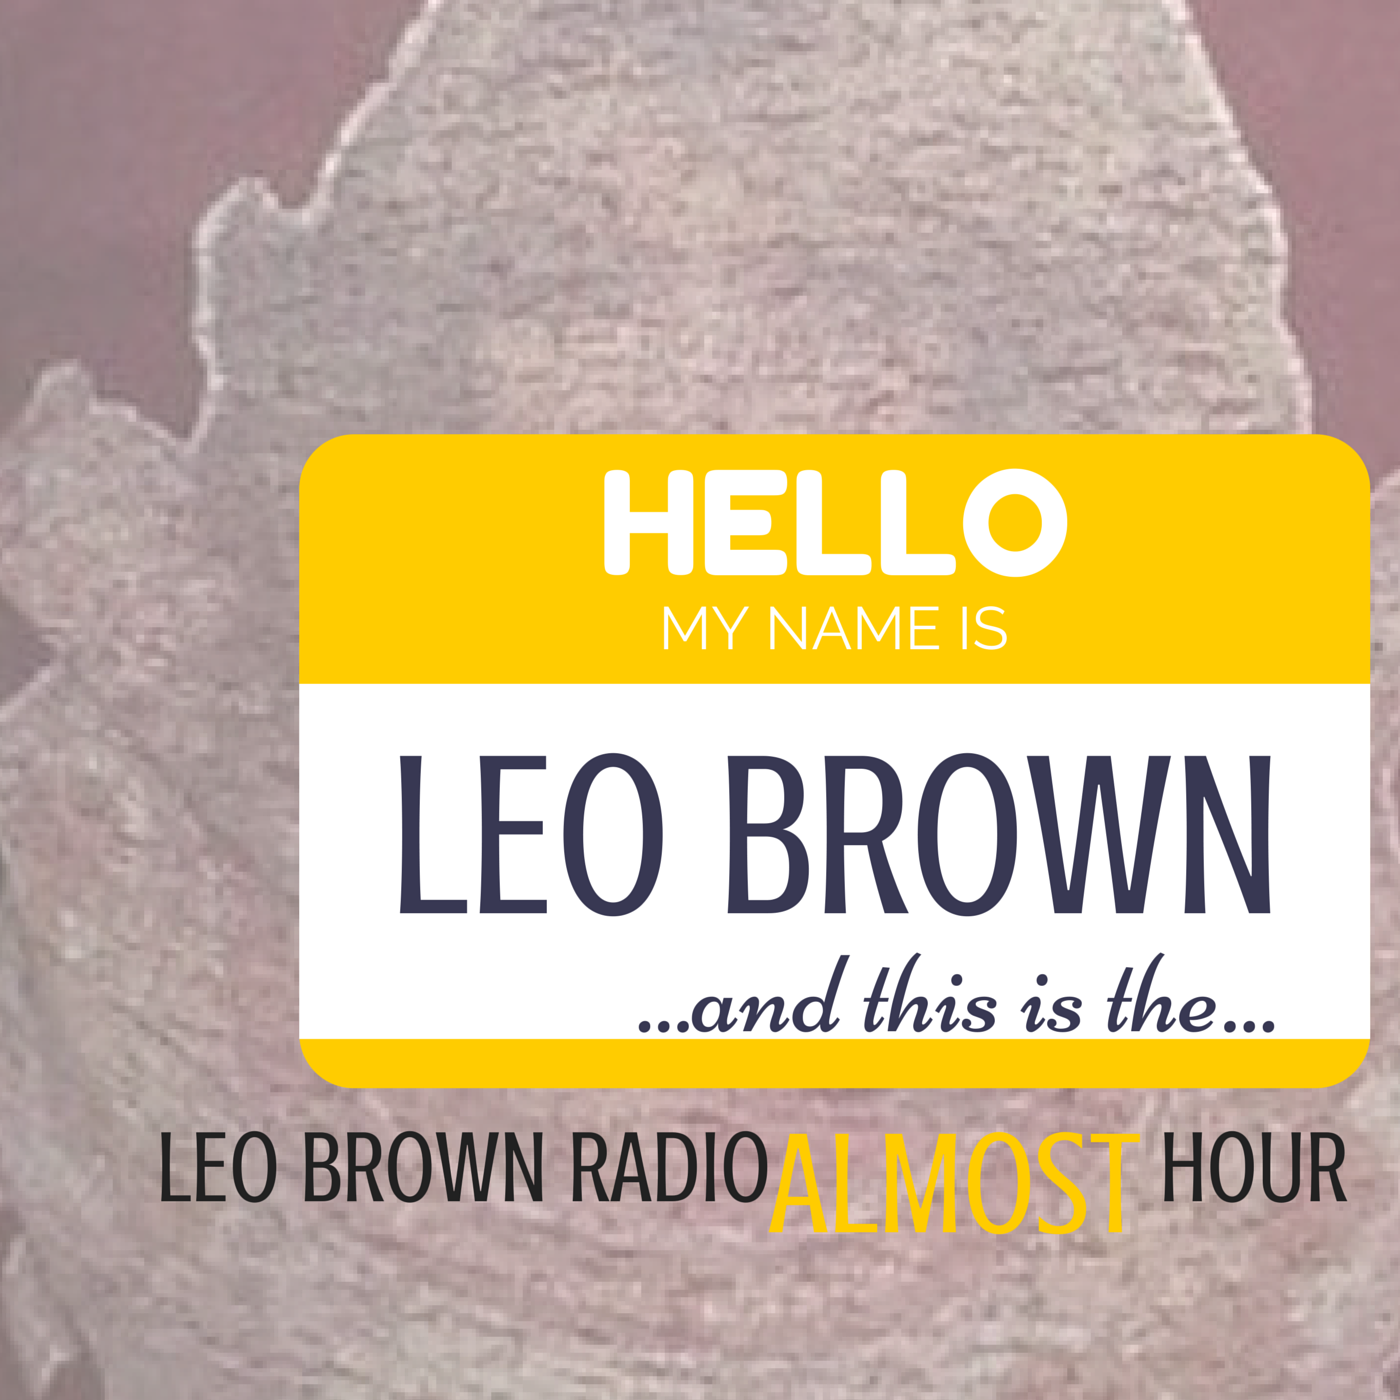 Leo Brown Almost Hour 03/08/17